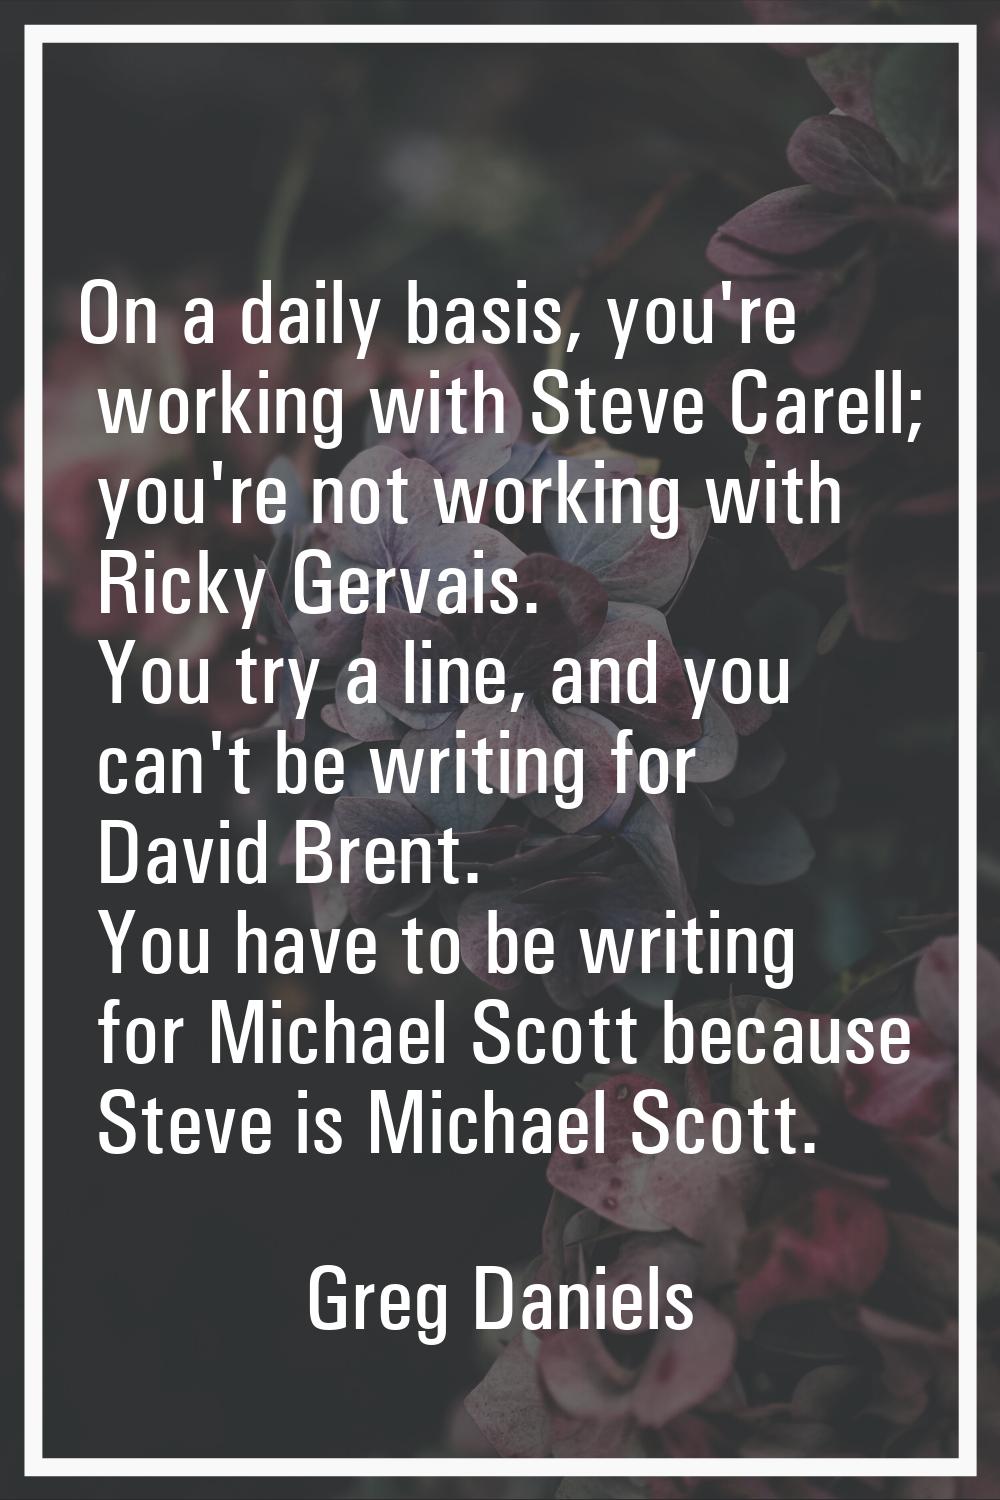 On a daily basis, you're working with Steve Carell; you're not working with Ricky Gervais. You try 